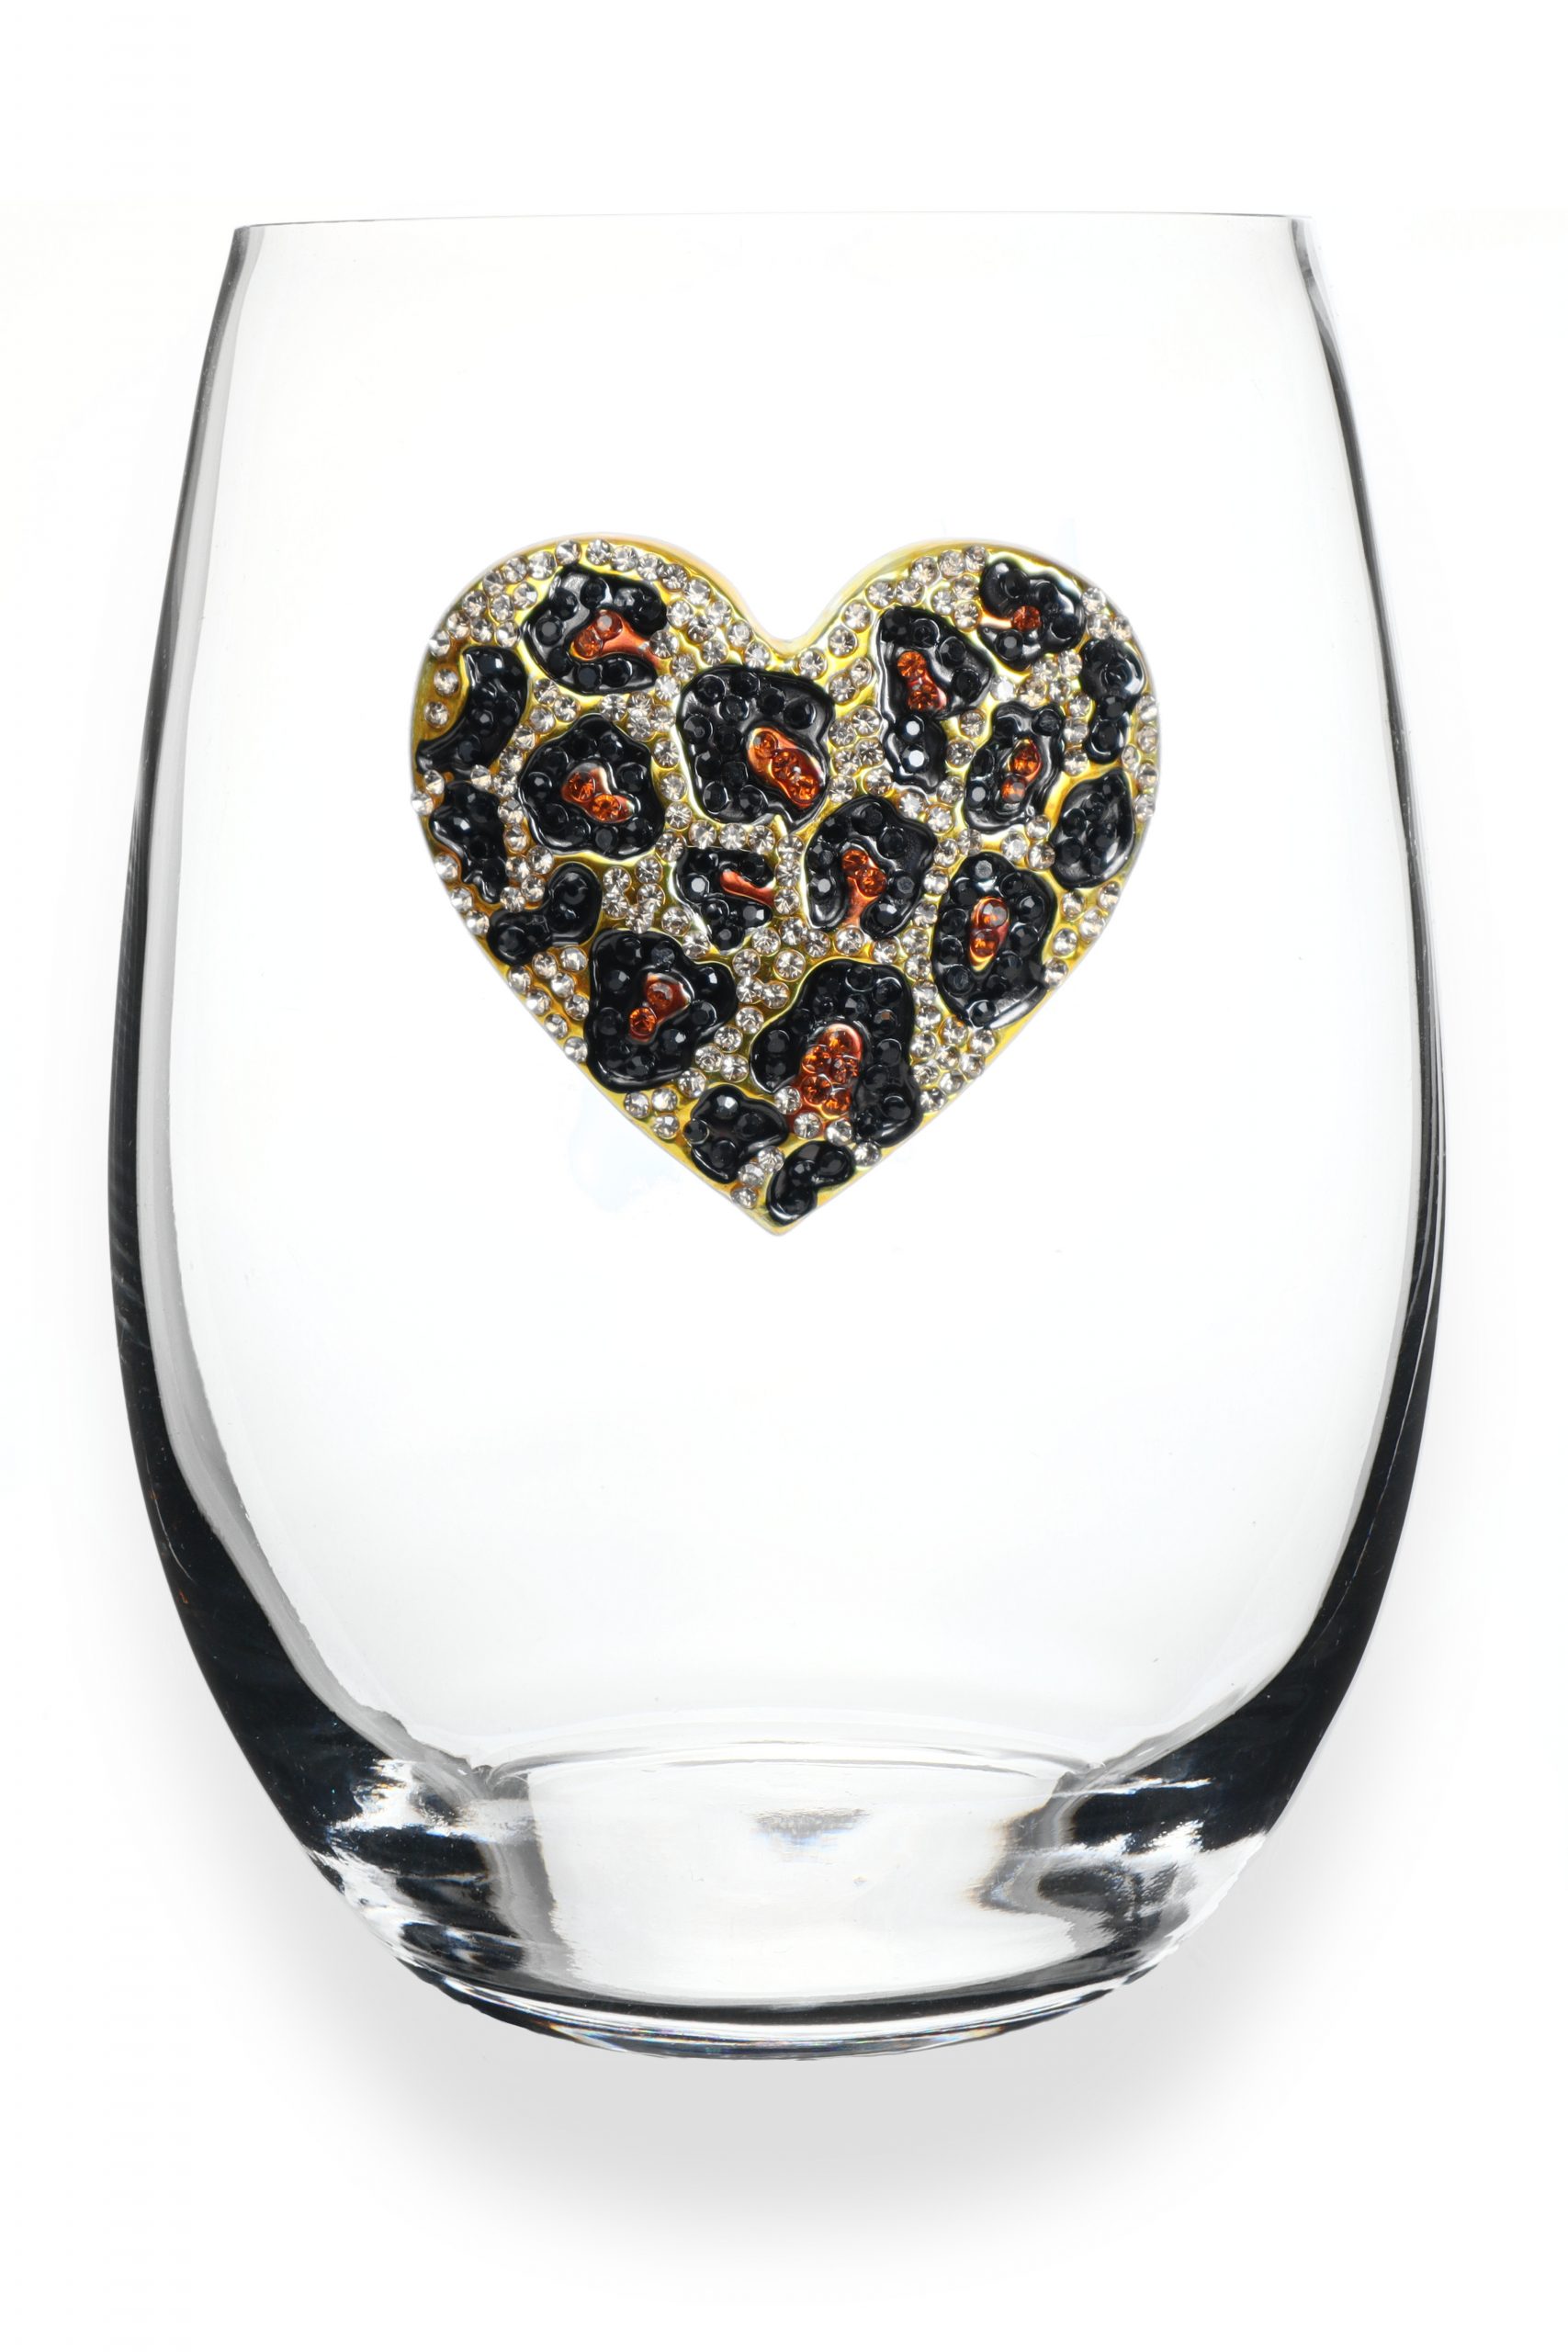 LEOPARD HEART STEMLESS WINE GLASS - Molly's! A Chic and Unique Boutique 